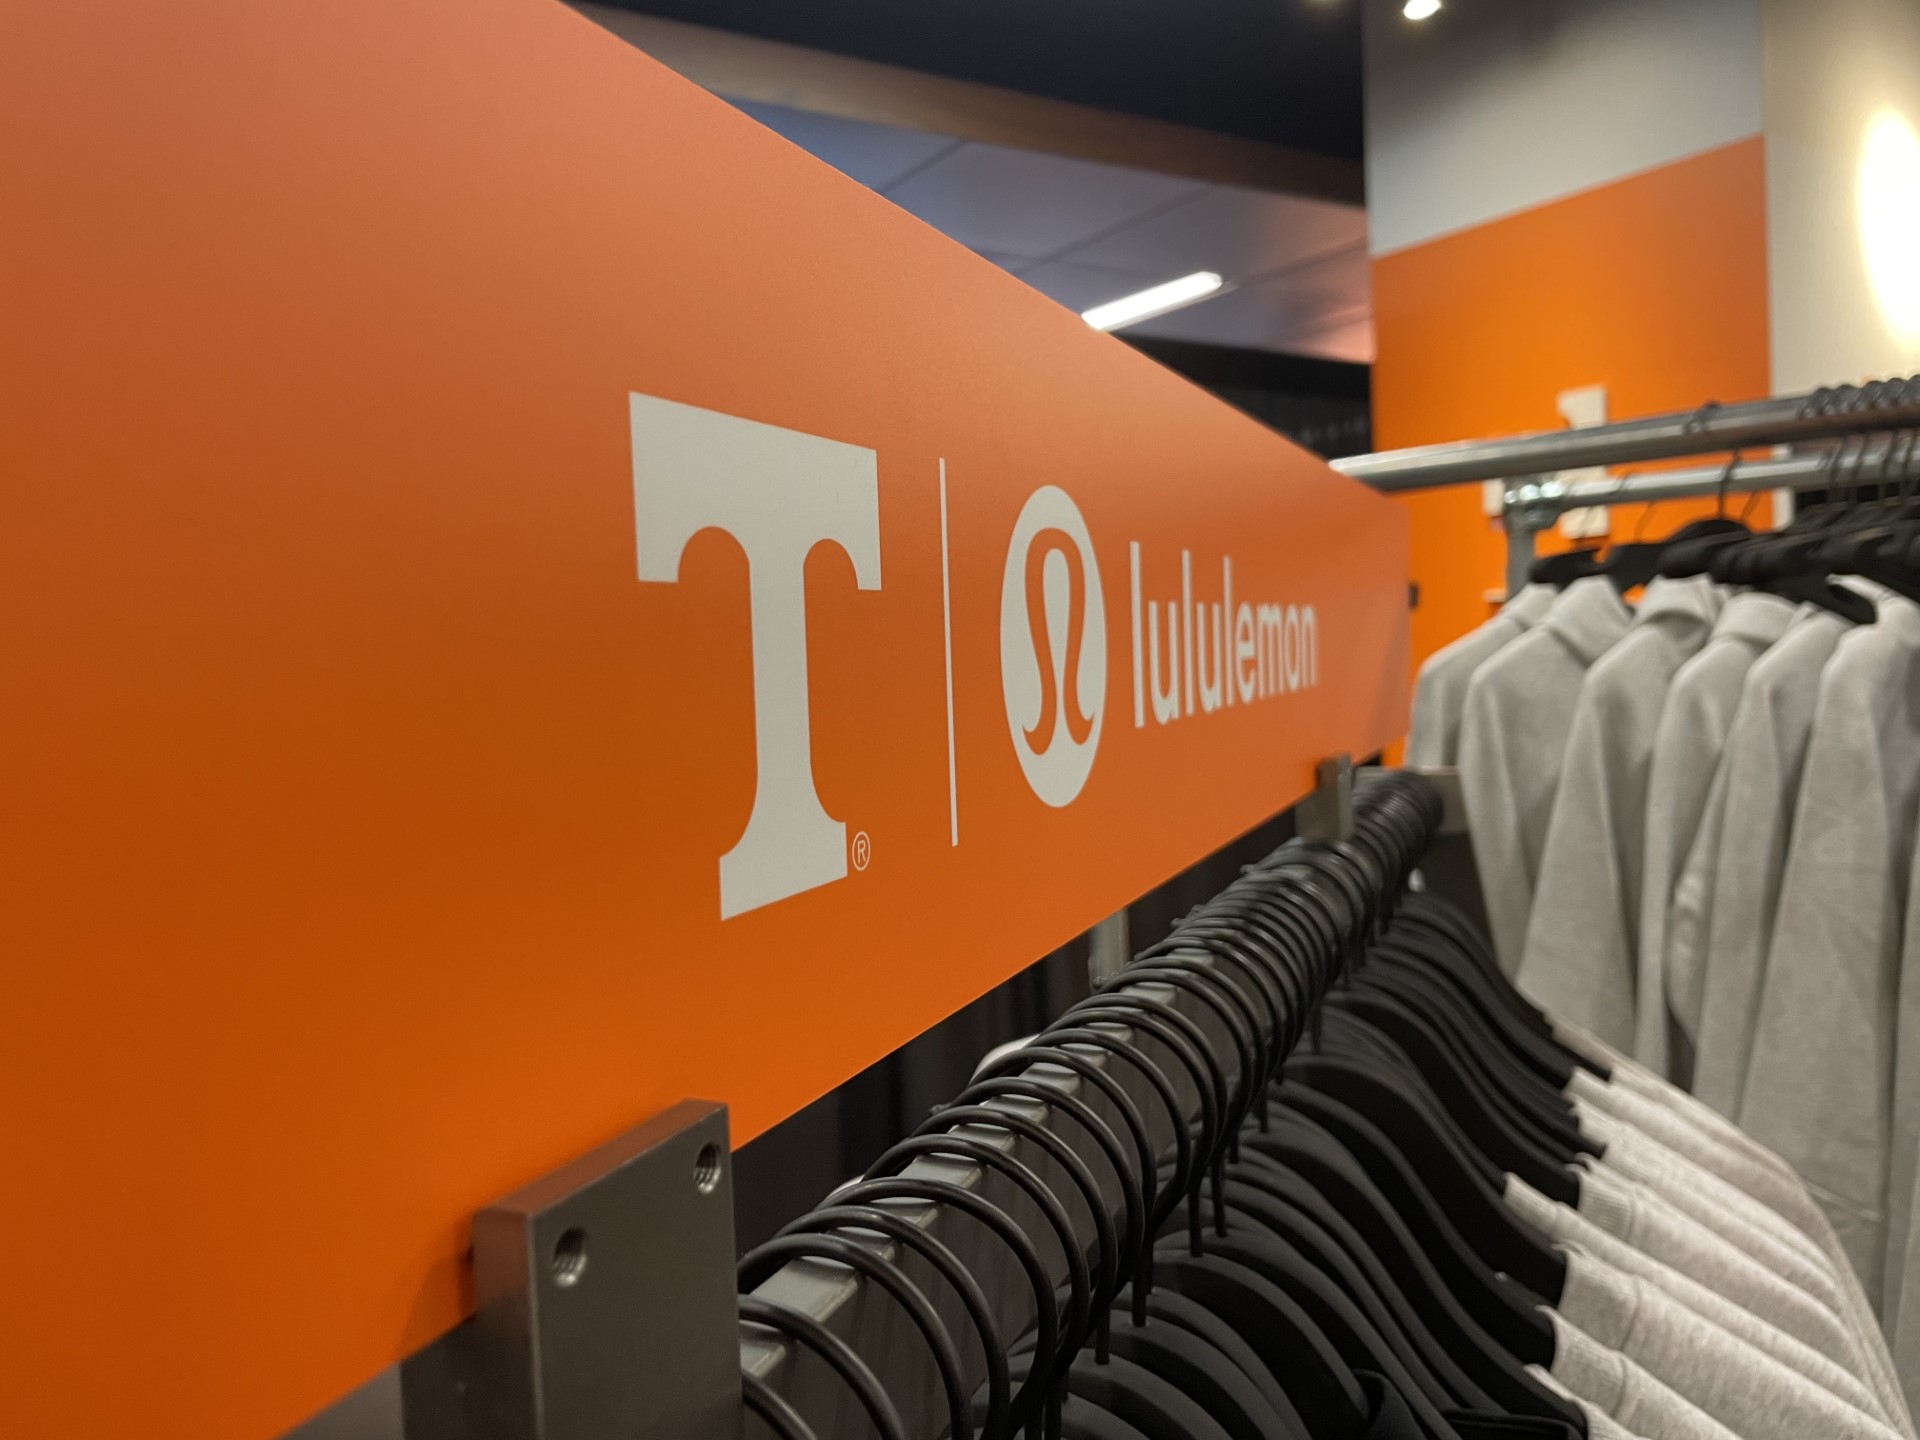 lululemon Tennessee Align Tank VolShop - Official Campus Store of